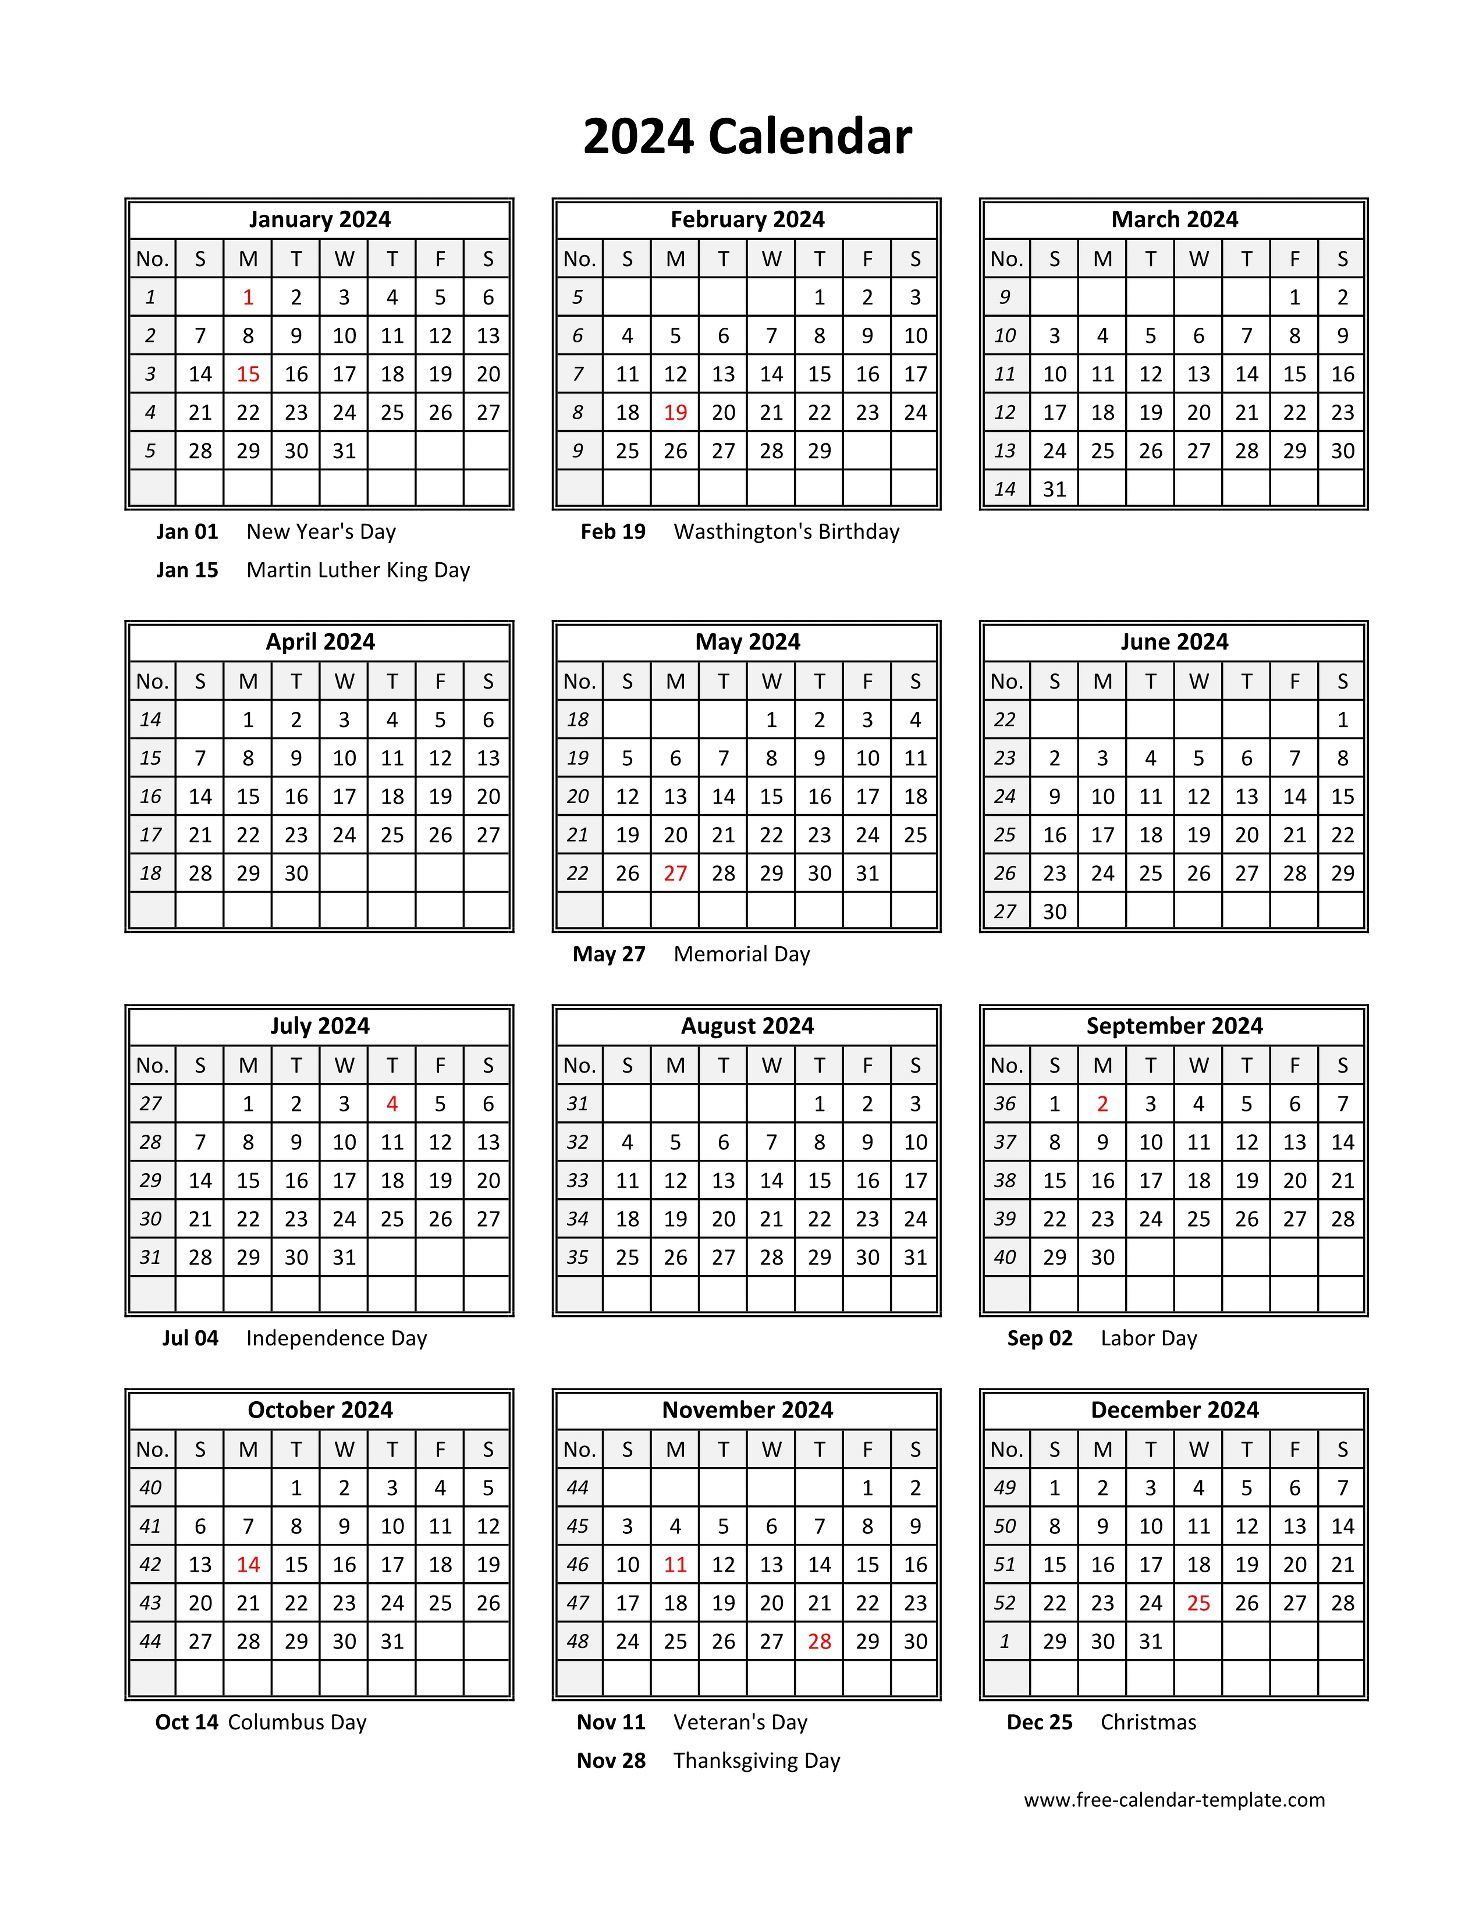 Yearly Printable Calendar 2024 With Holidays | Free-Calendar | Free Printable 2024 Calendar One Page Word